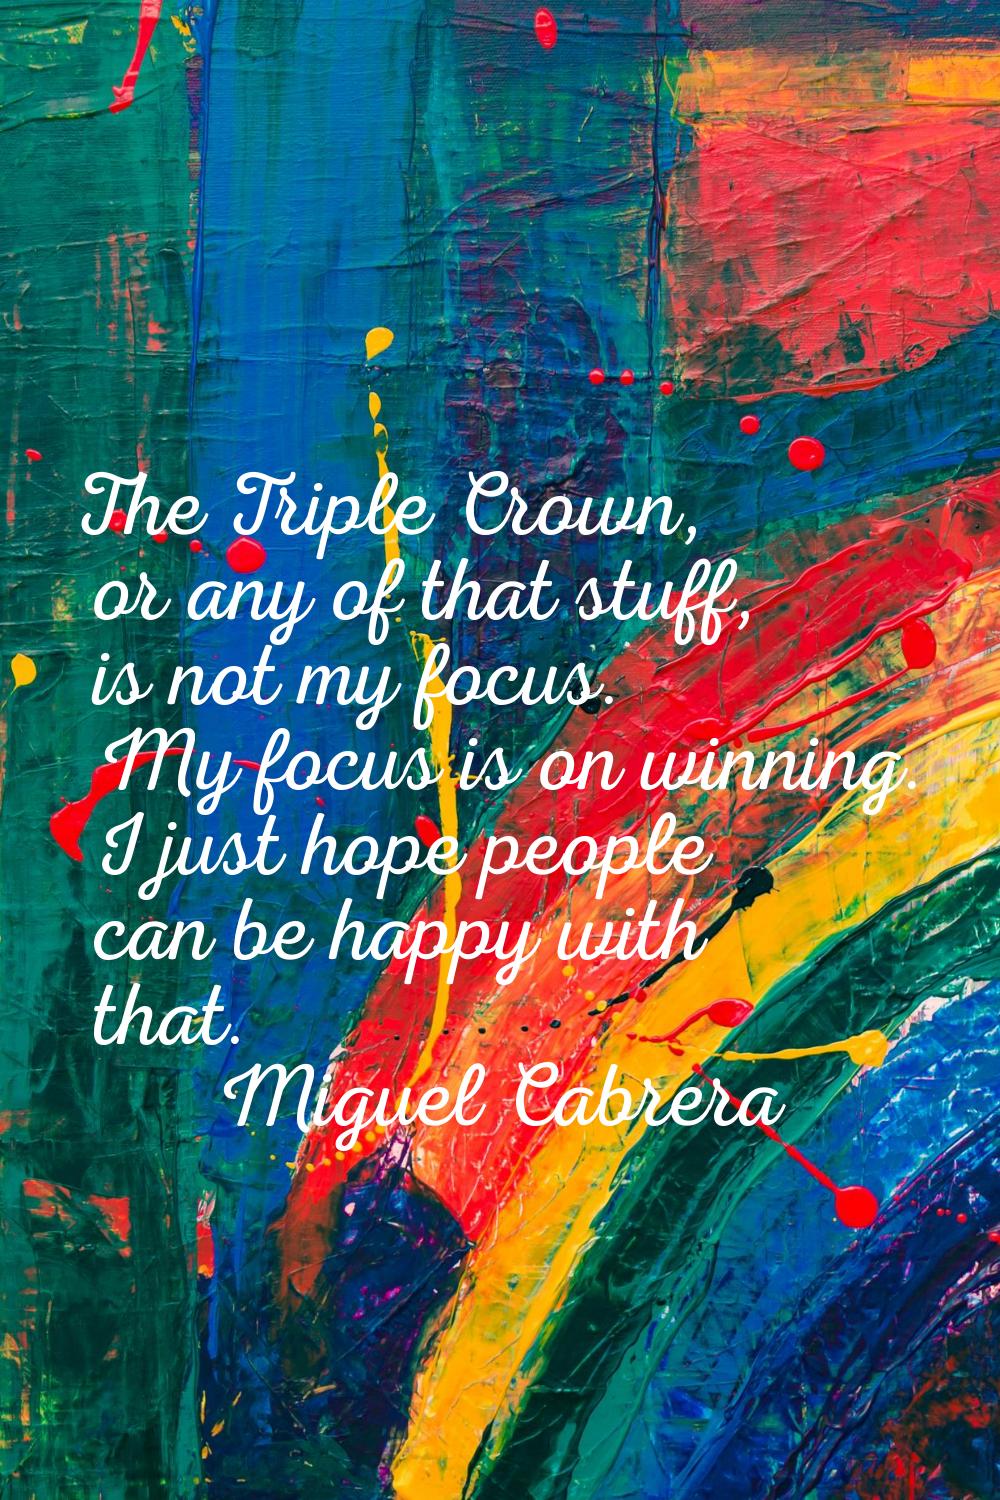 The Triple Crown, or any of that stuff, is not my focus. My focus is on winning. I just hope people